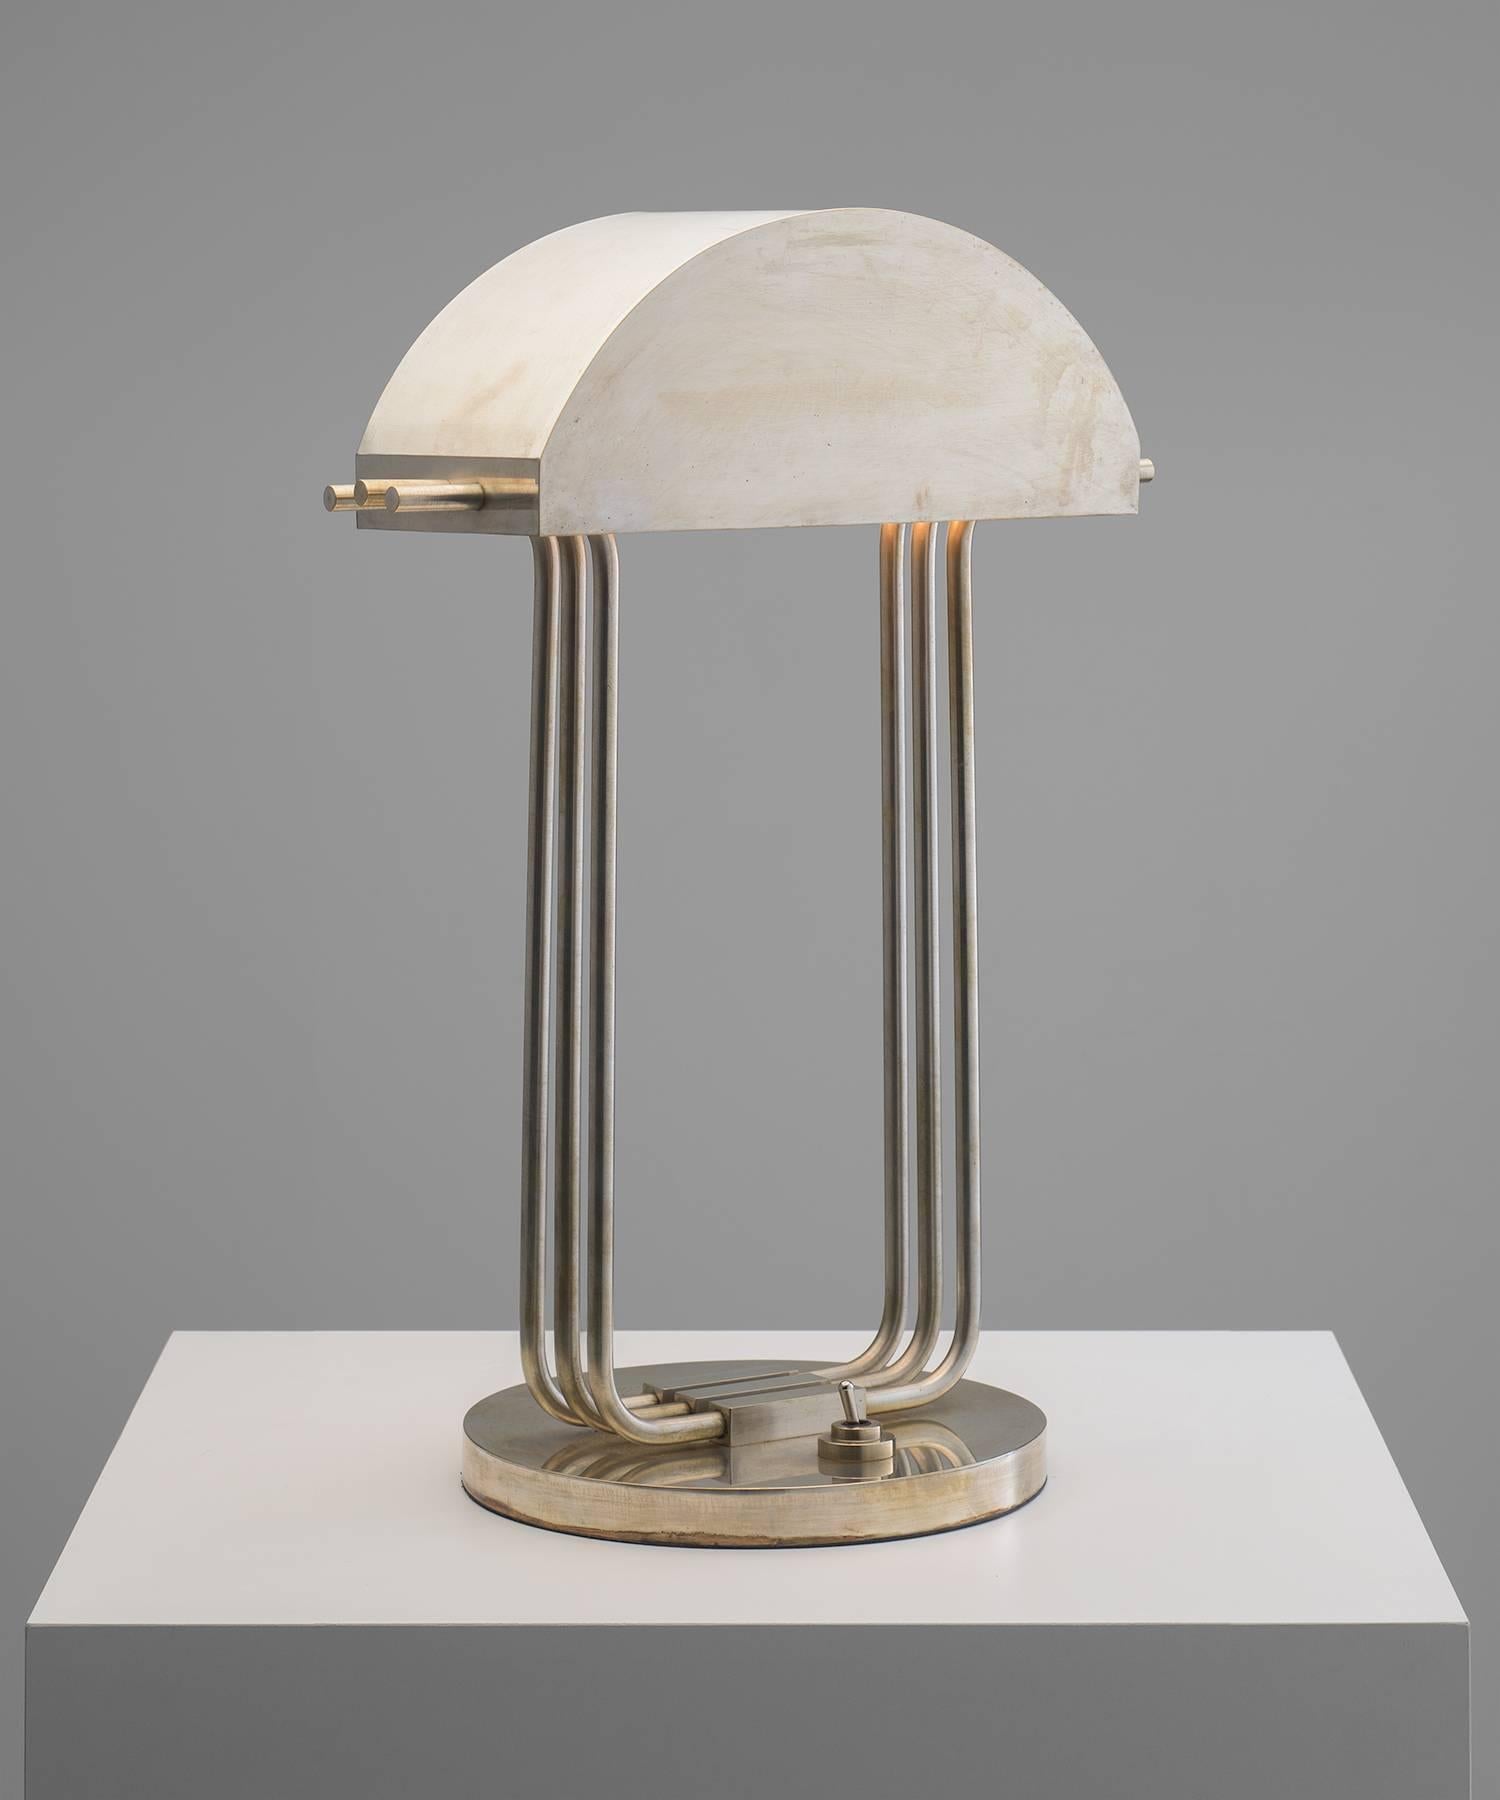 Marcel Breuer brass desk lamp, circa 1925.

Created for the International Exposition of Modern Industrial and Decorative Arts, in Paris. This model features brass plated nickel and is stamped “Exposition Paris 1925”.